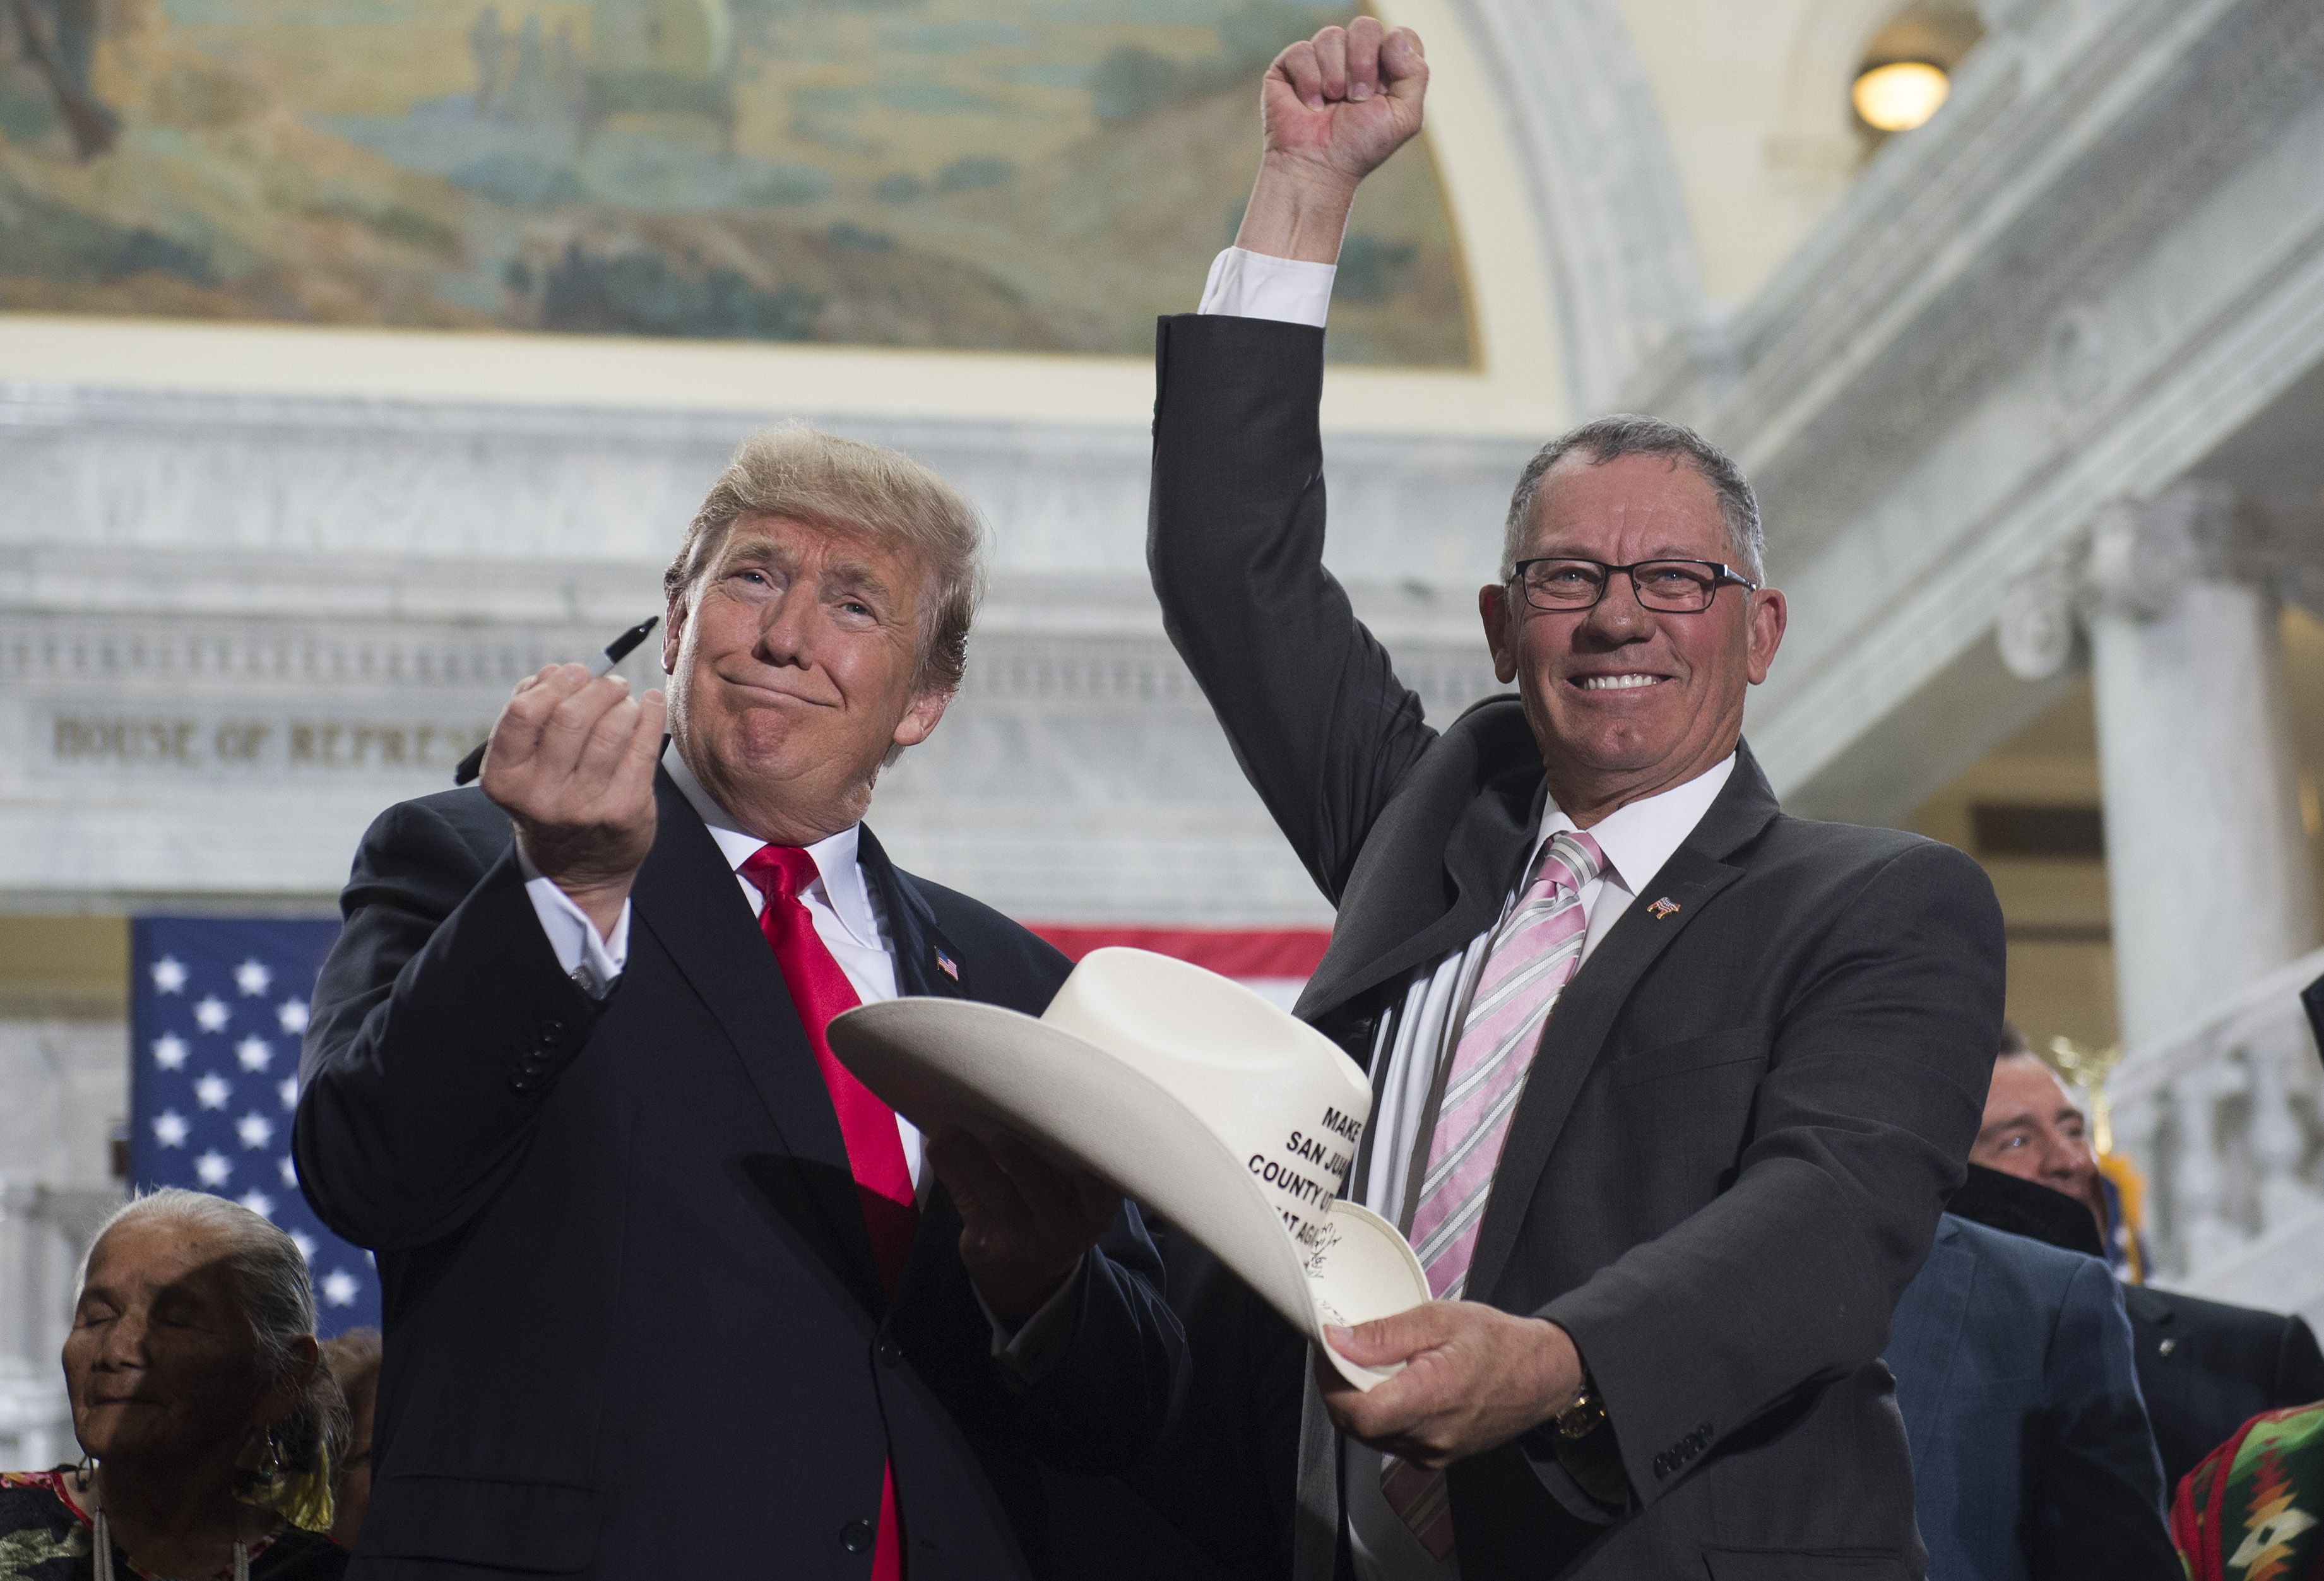 President Trump signs the hat of Bruce Adams, Chairman of the San Juan County Commission, following a Presidential Proclamation shrinking Bears Ears and Grand Staircase-Escalante national monuments.